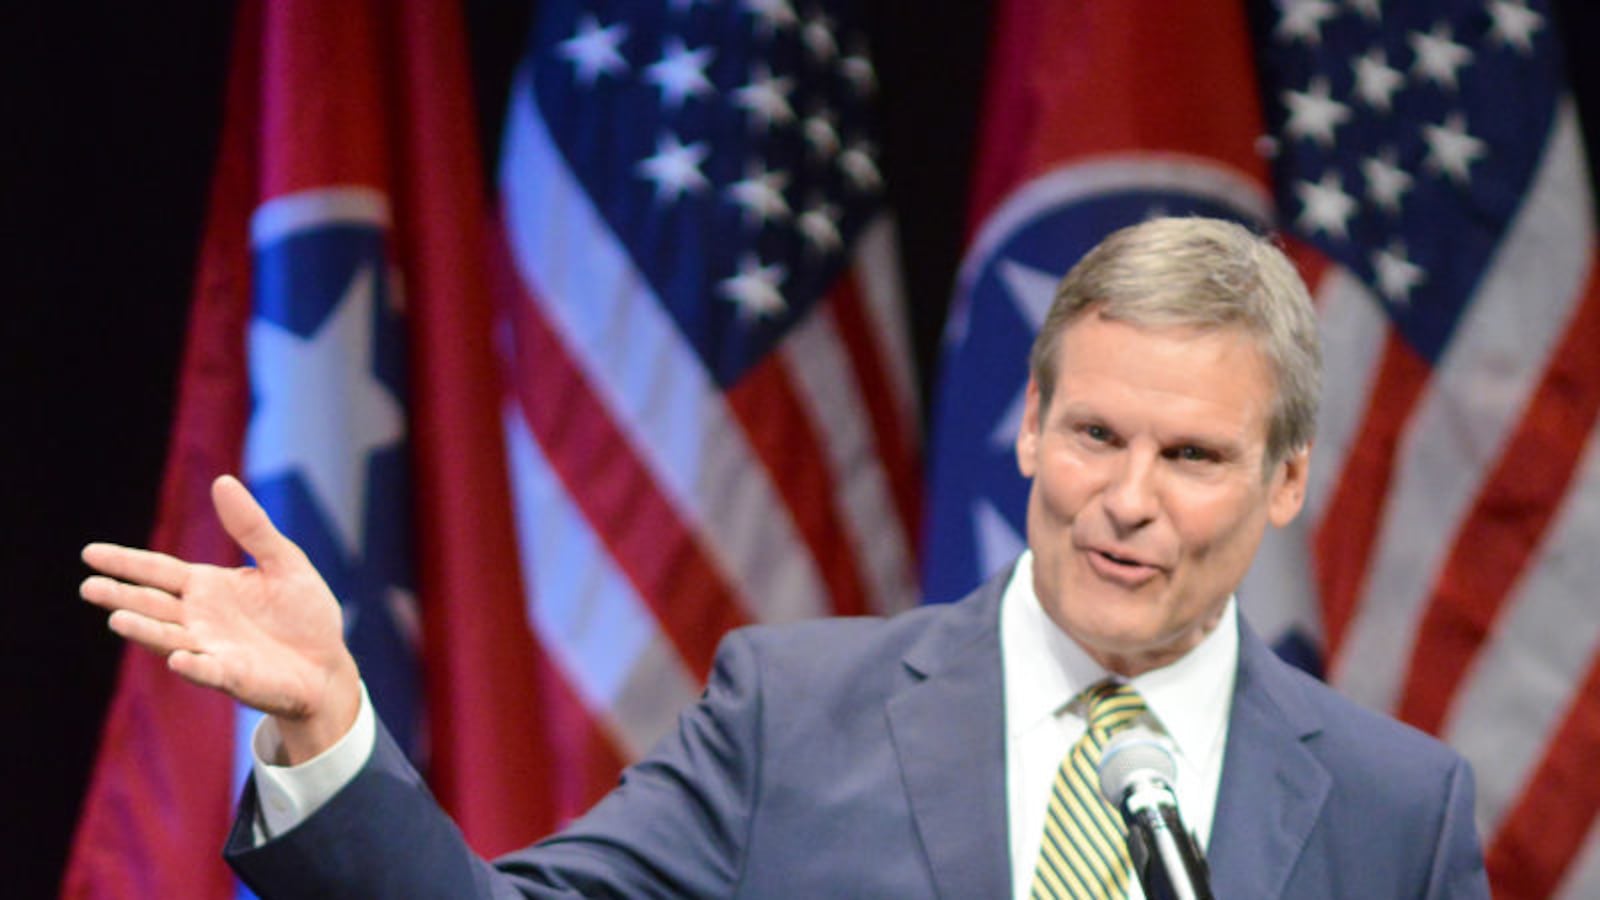 Bill Lee was elected Tennessee’s 50th governor in November and will take the oath of office on Jan. 19.